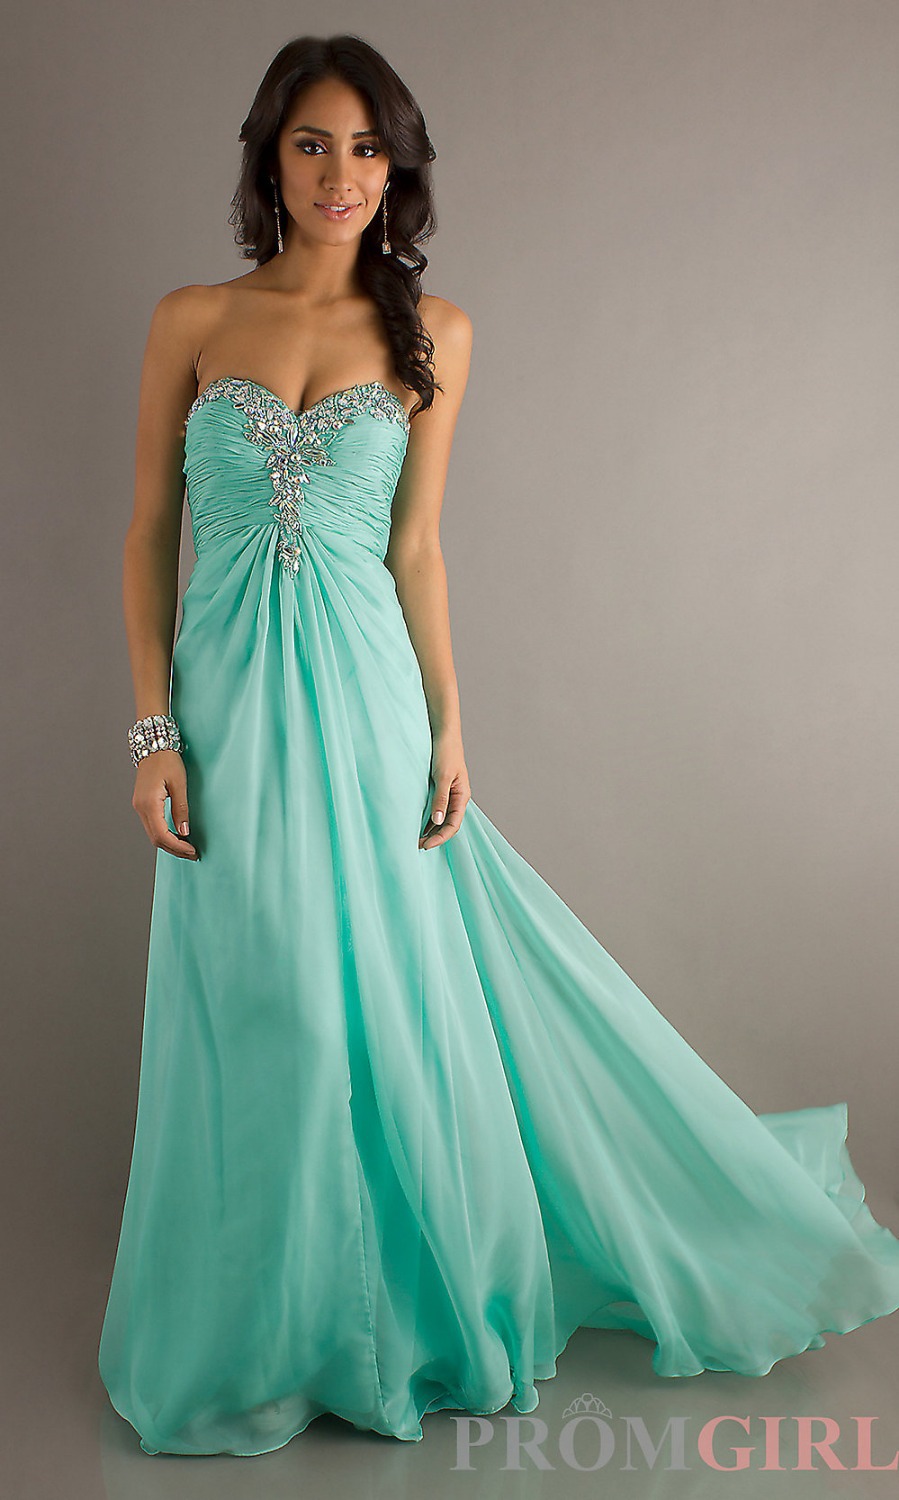 Cheap-Best-Selleing-Mint-Green-Sweetheart-Chffom-Prom-Dresses-party ...